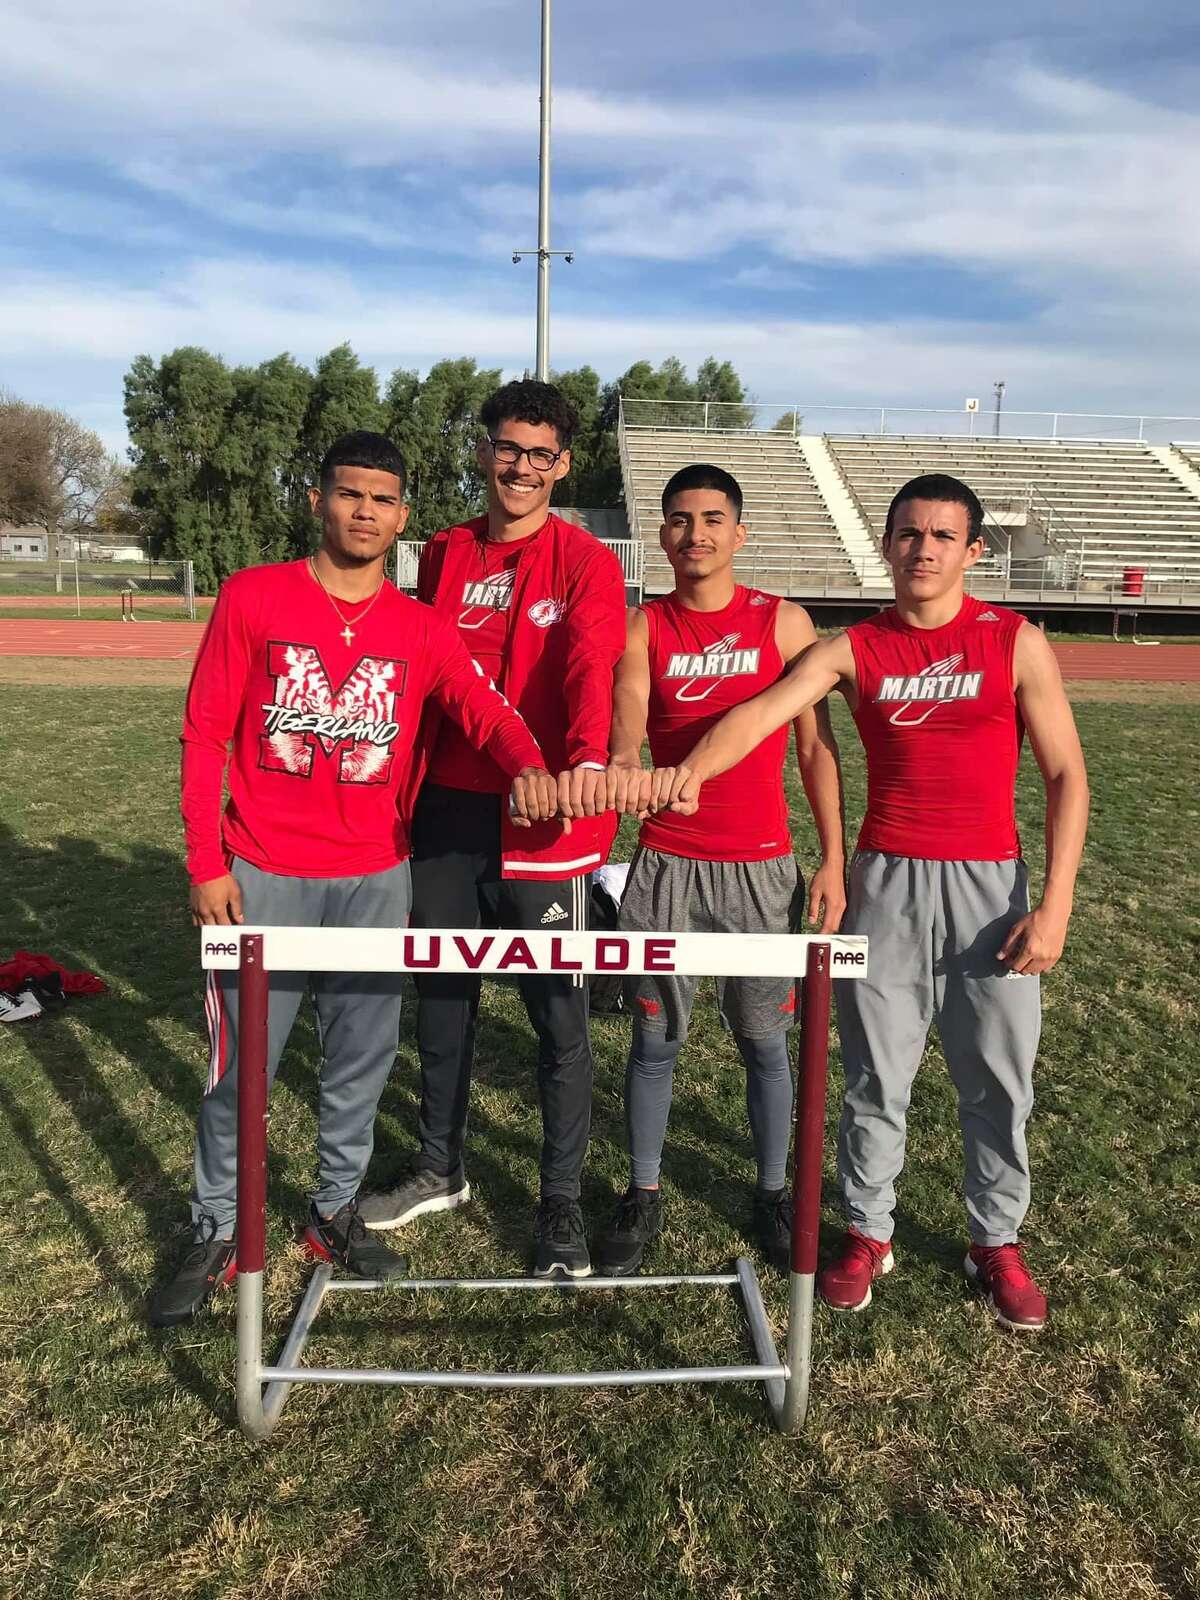 The Martin boys’ 4x400-meter relay team — Cesar Jimenez, Miguel Vasquez, Guillermo Navarro and Miguel Escamilla — remains undefeated this season as the Tigers won the event at the Uvalde meet this past weekend with a 3:32.